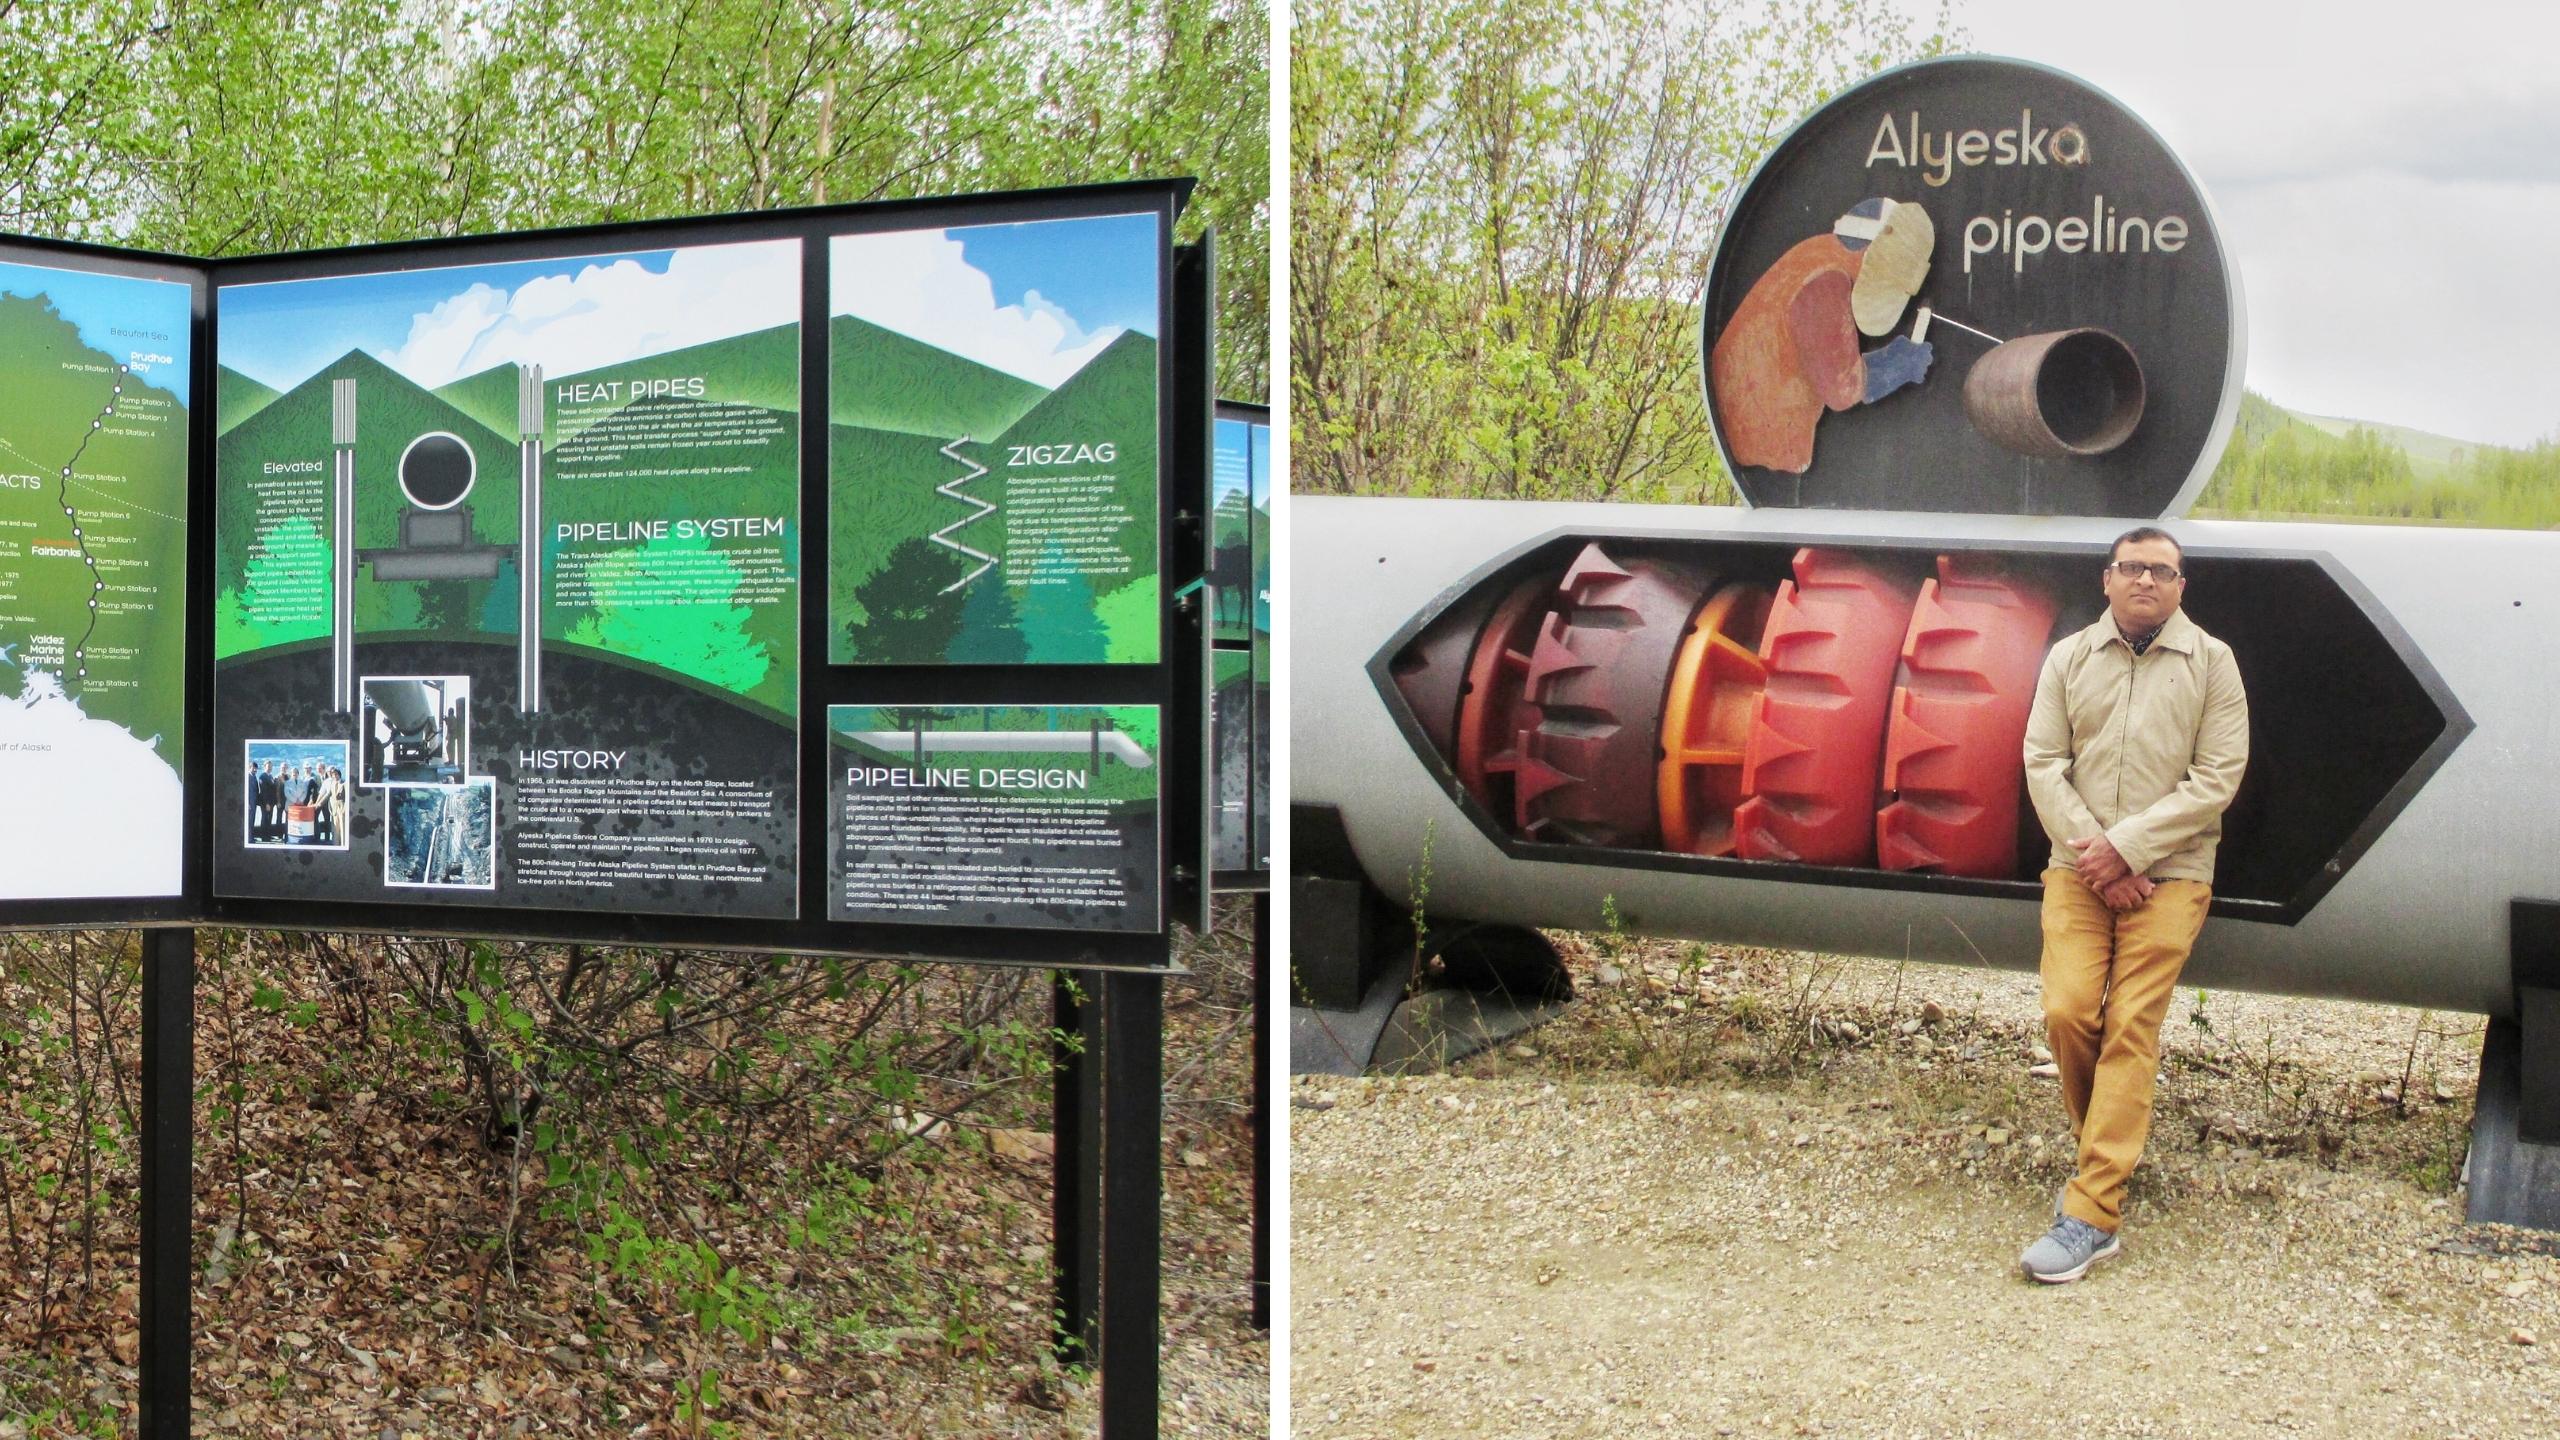 Alyeska pipeline demonstration with its history, facts and figures in Alaska